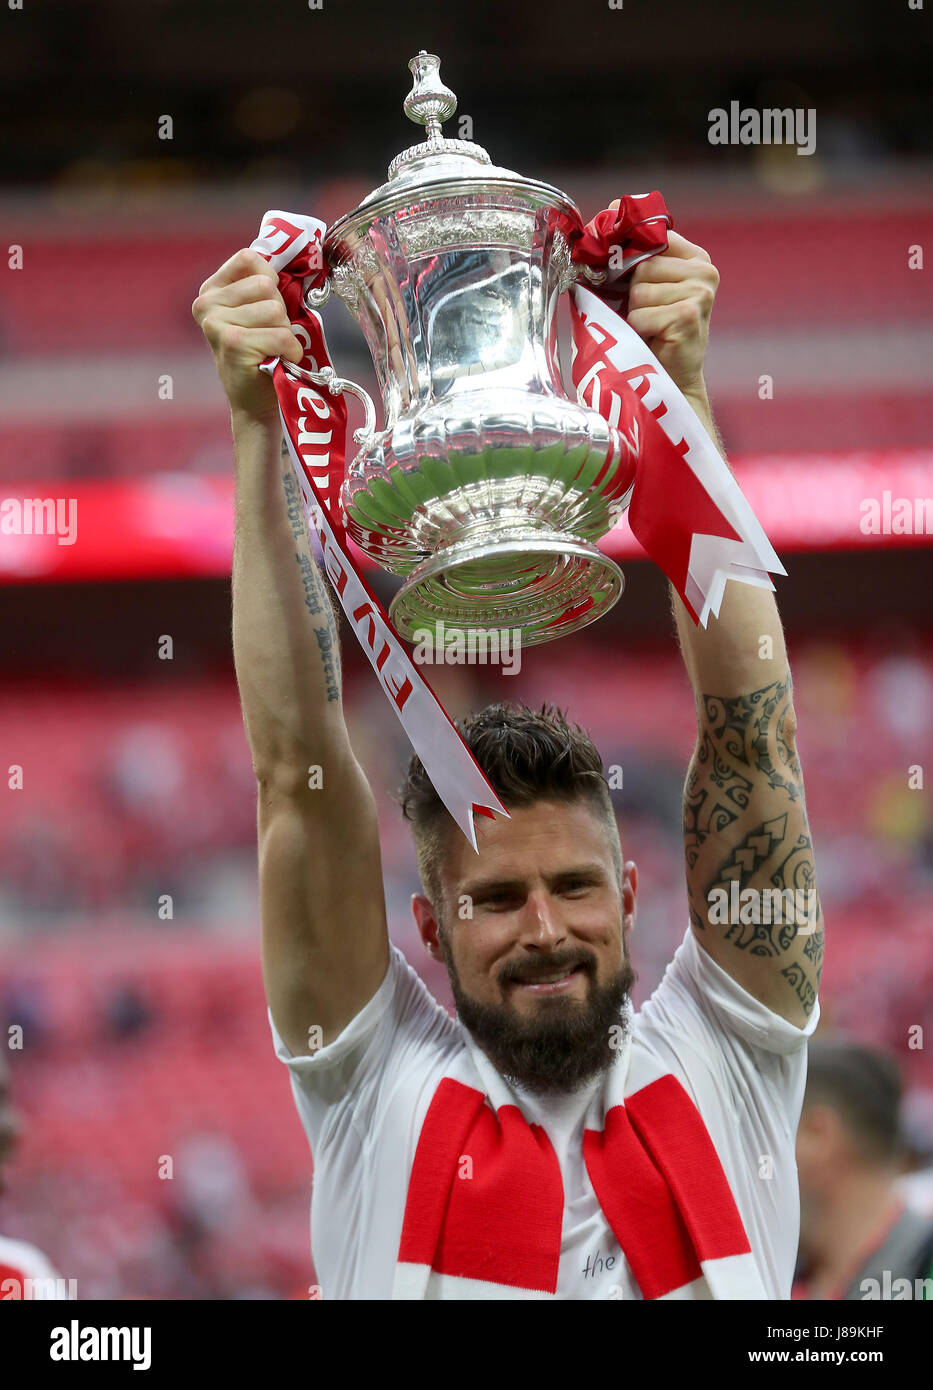 arsenals-olivier-giroud-celebrates-with-the-trophy-after-his-side-J89KHF.jpg